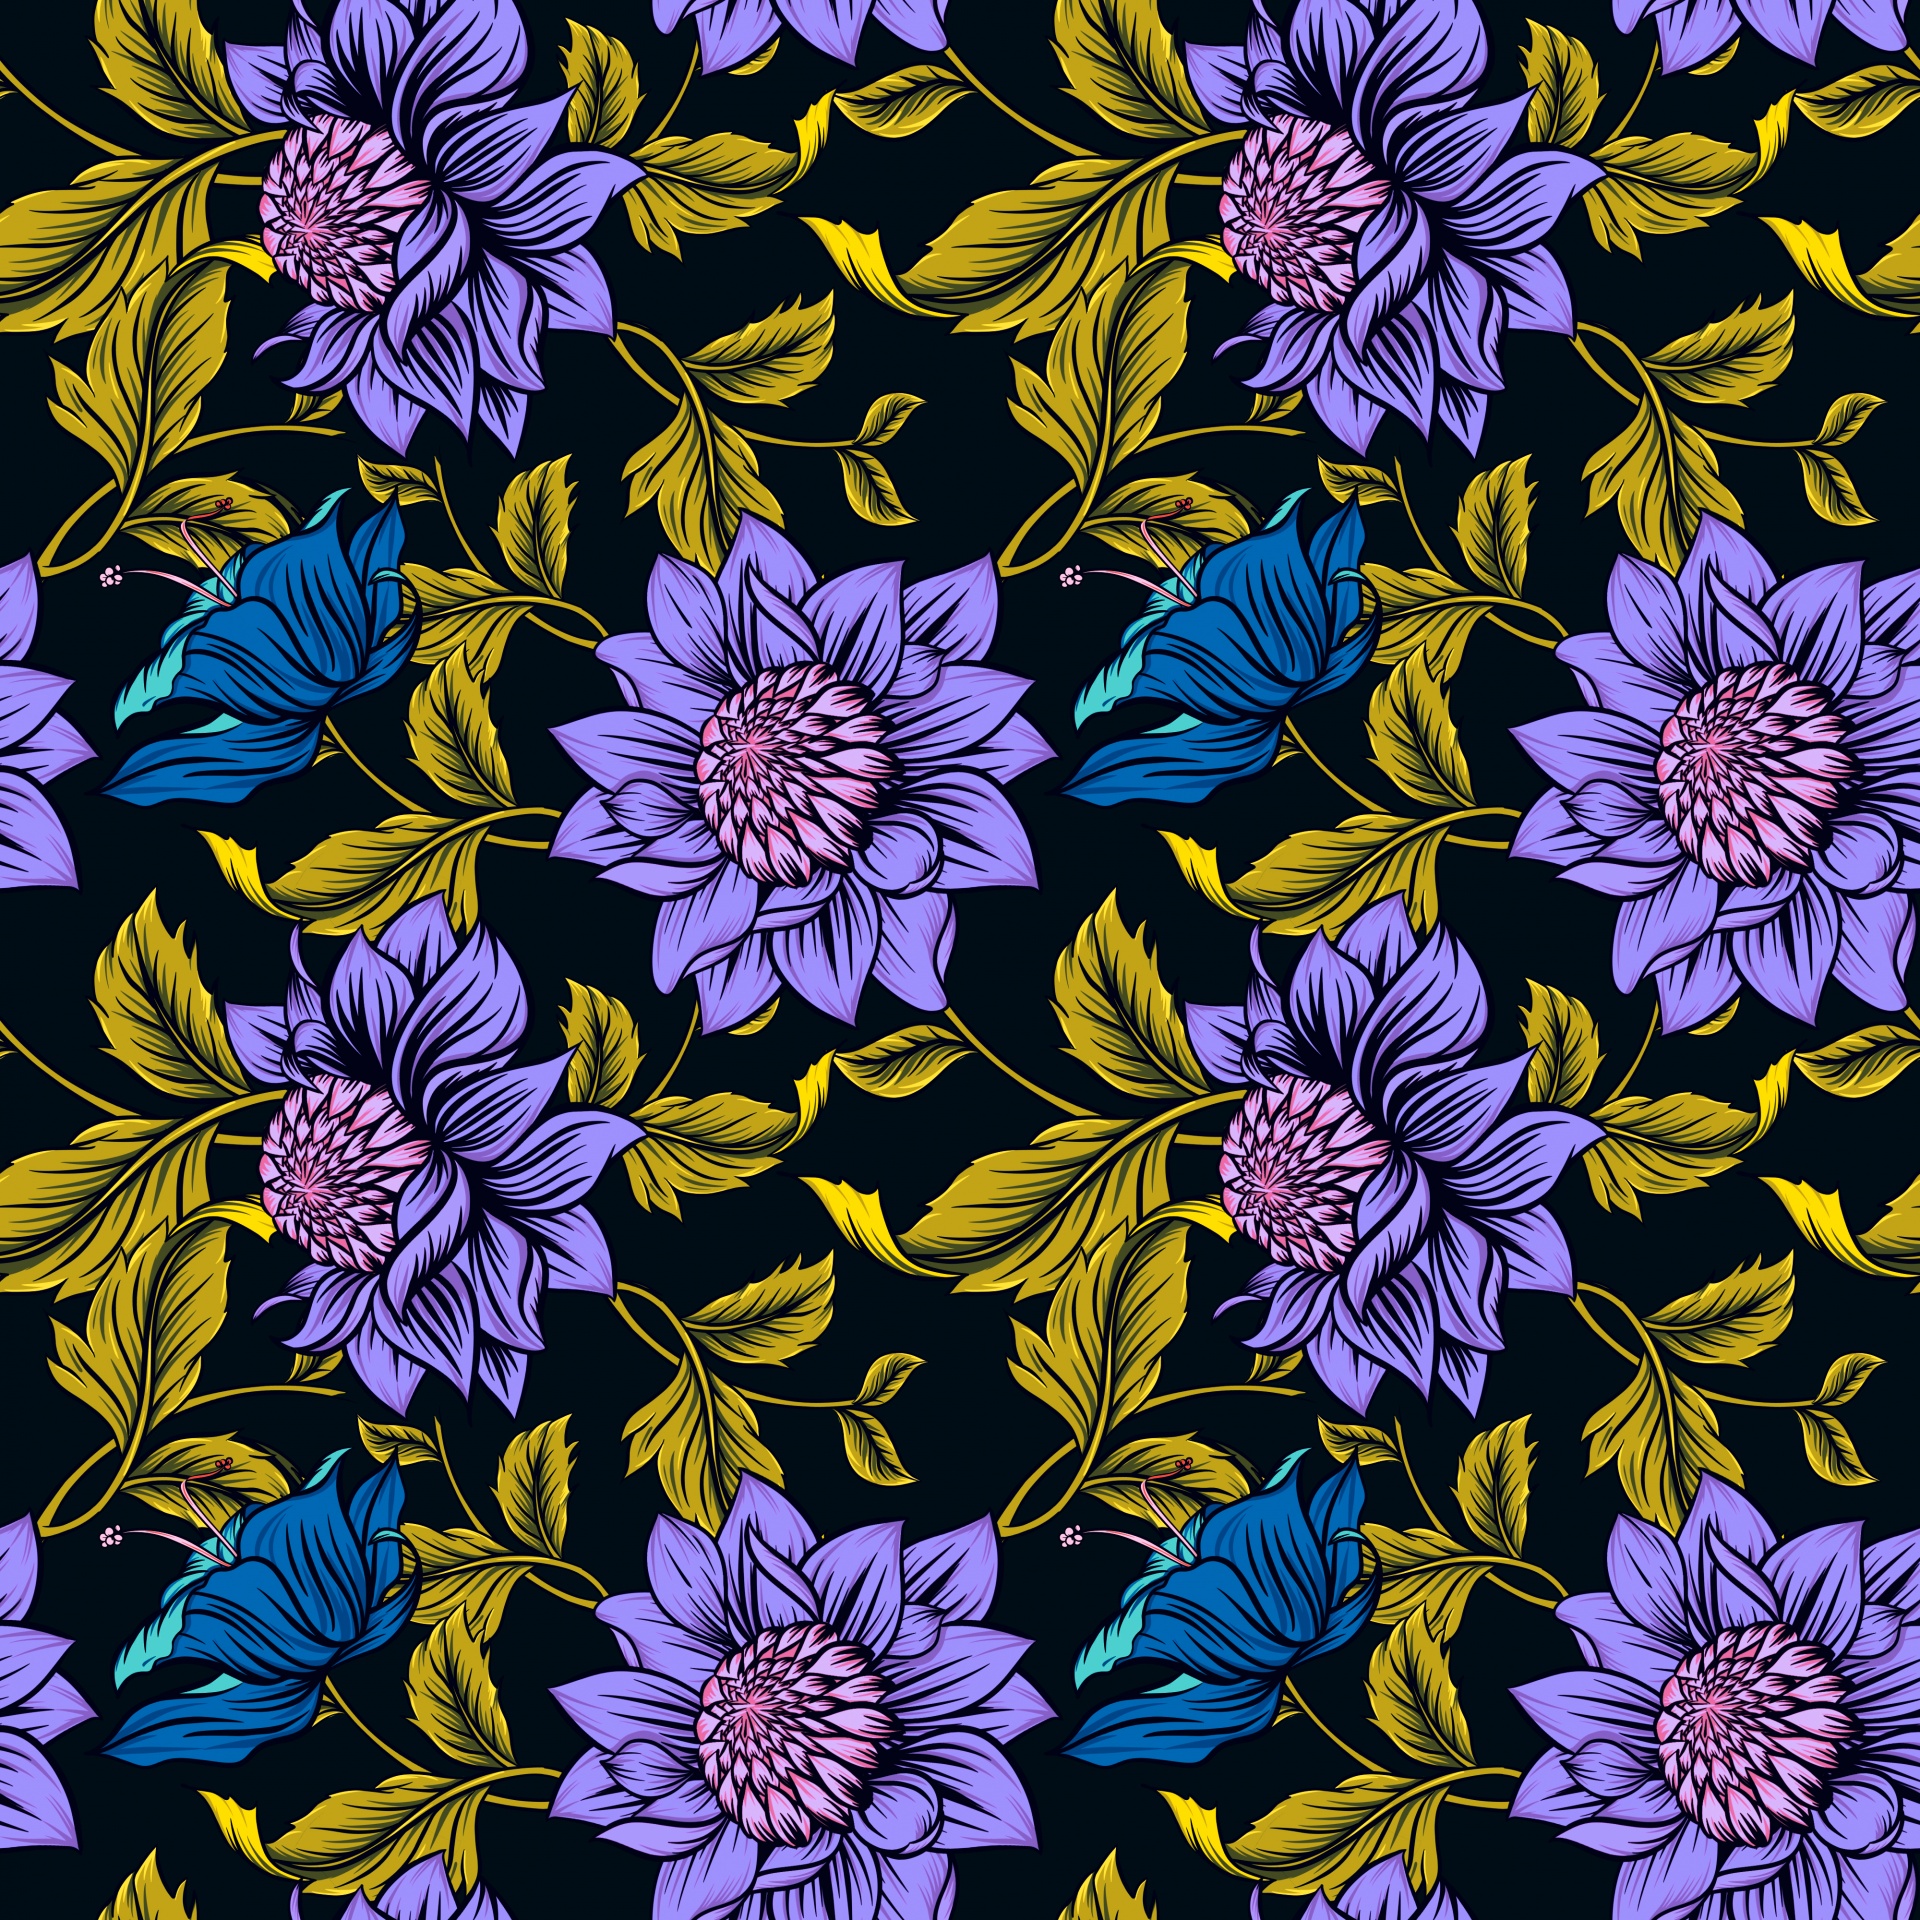 Blue floral flowers with golden leaves seamless wallpaper pattern background